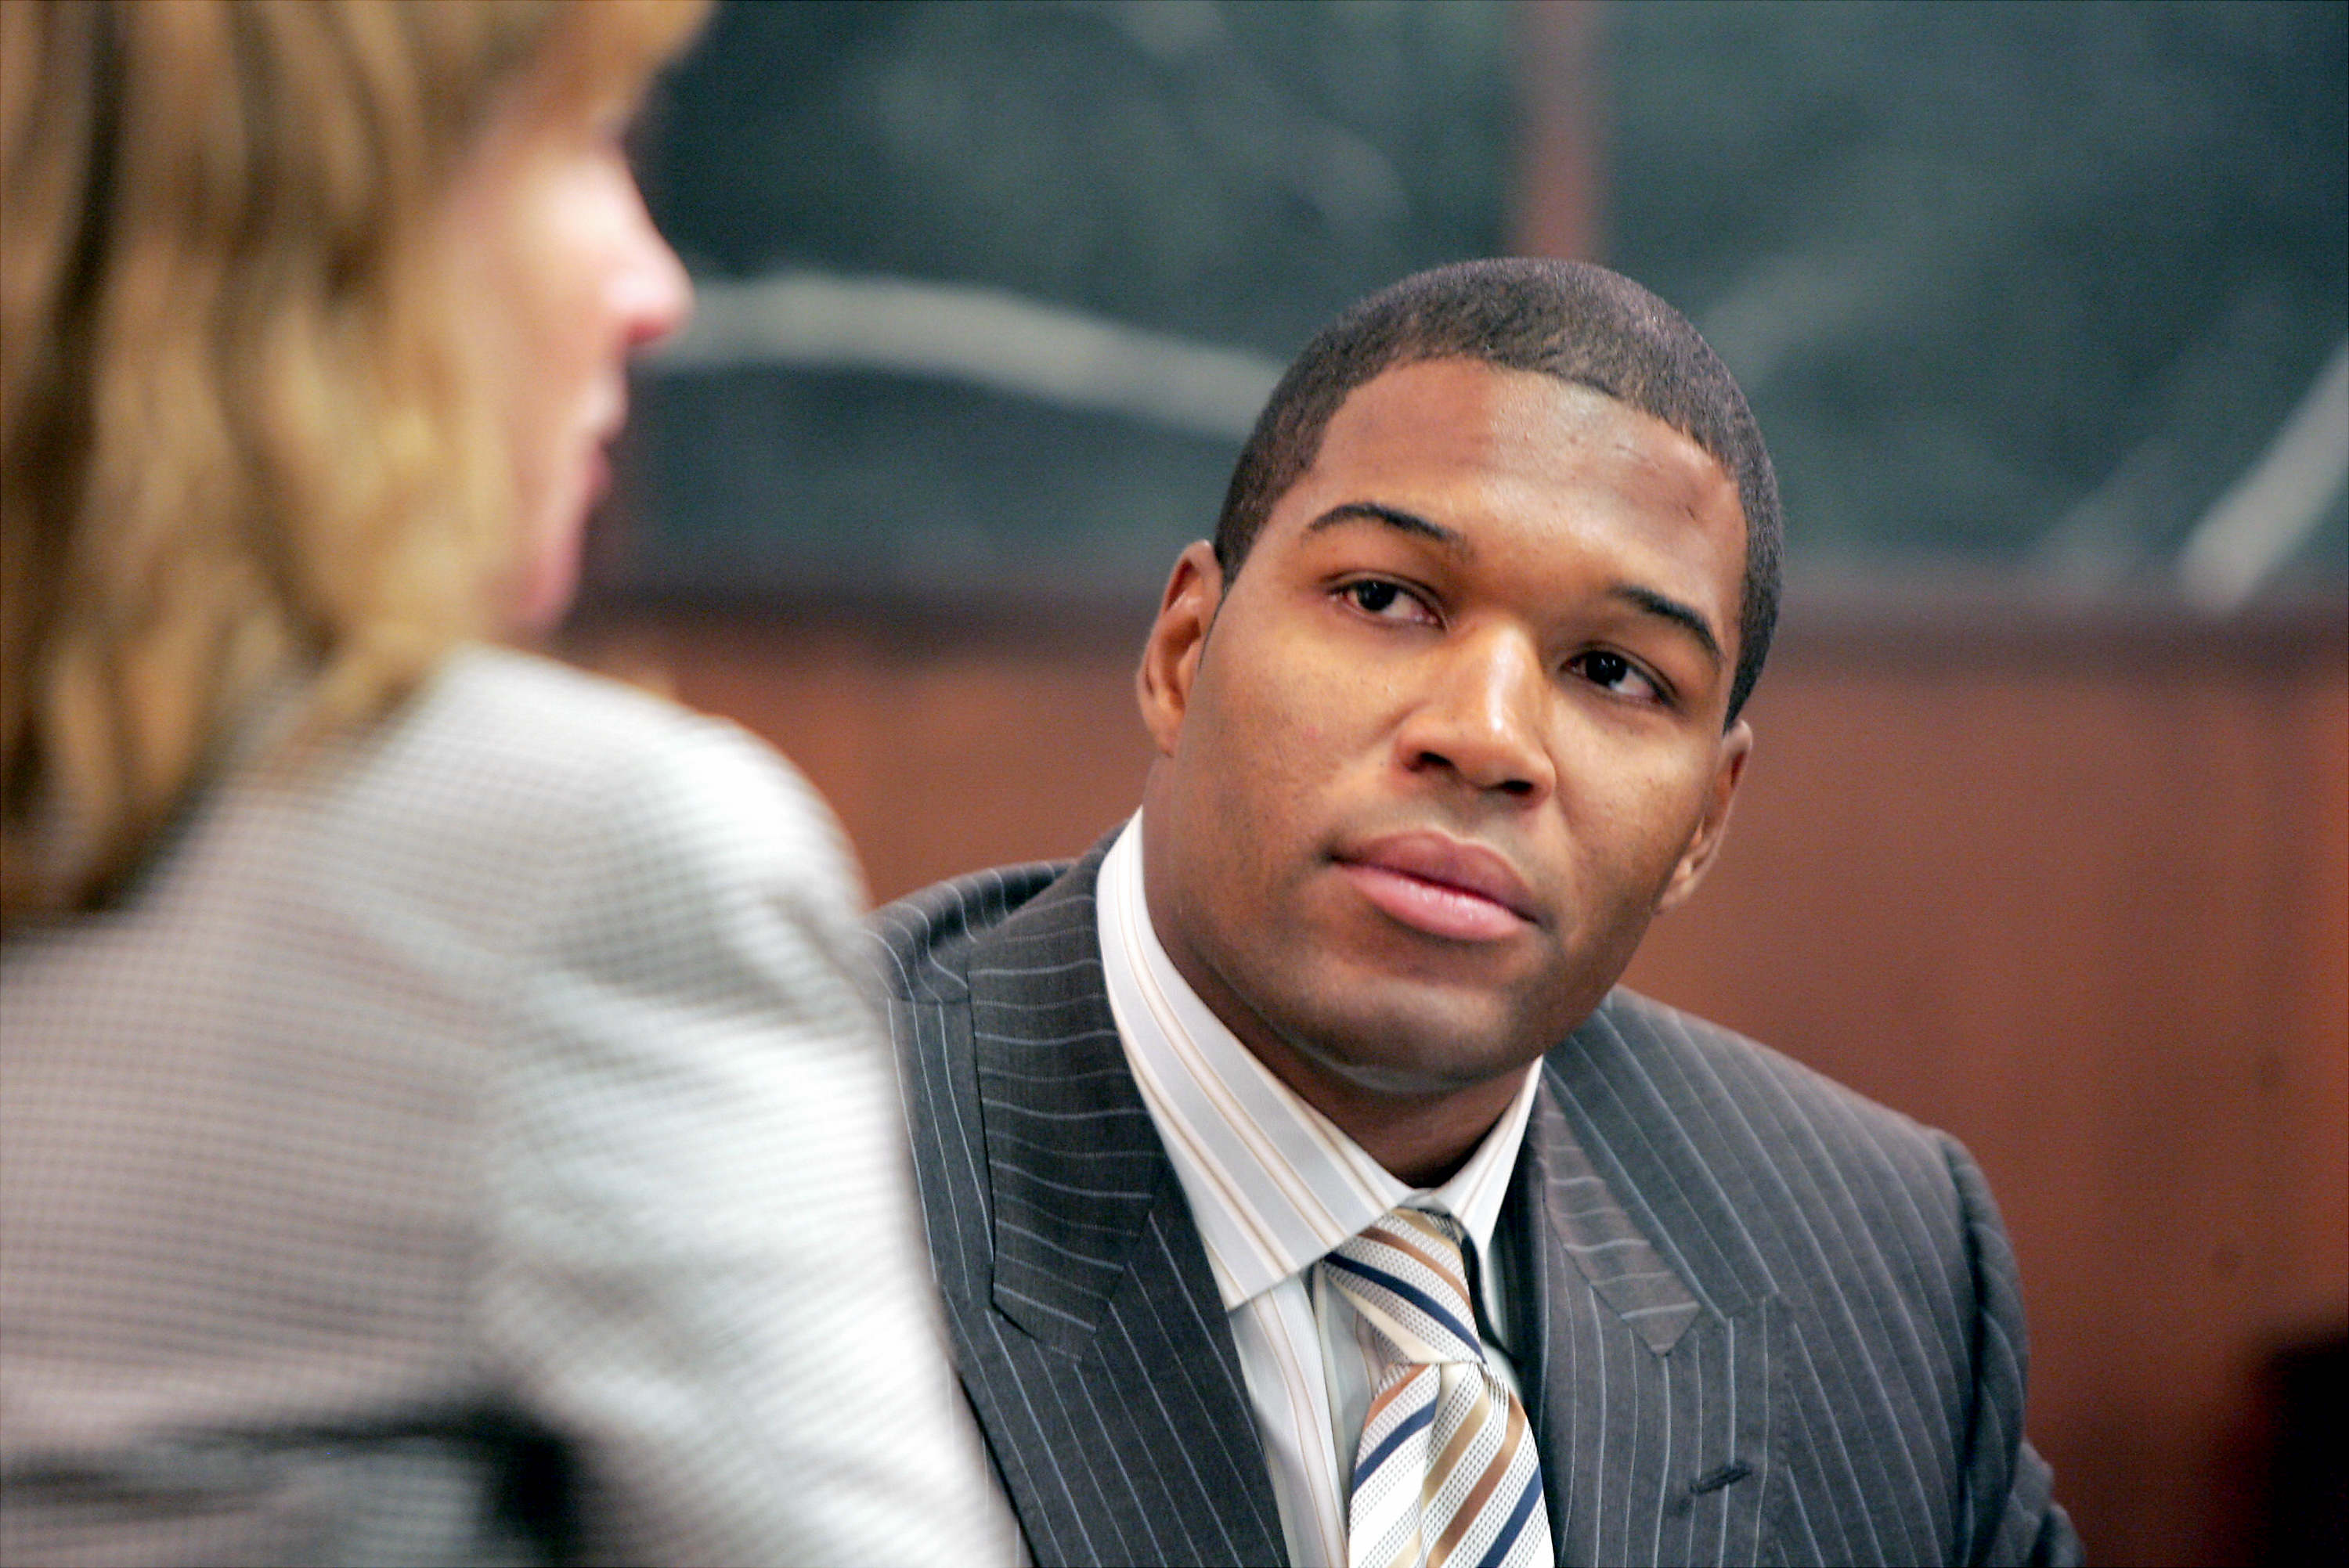 Michael Strahan on the last day of divorce proceedings with his estranged wife, Jean, at Essex County Family Court in Newark, New Jersey, on July 20, 2006 | Source: Getty Images